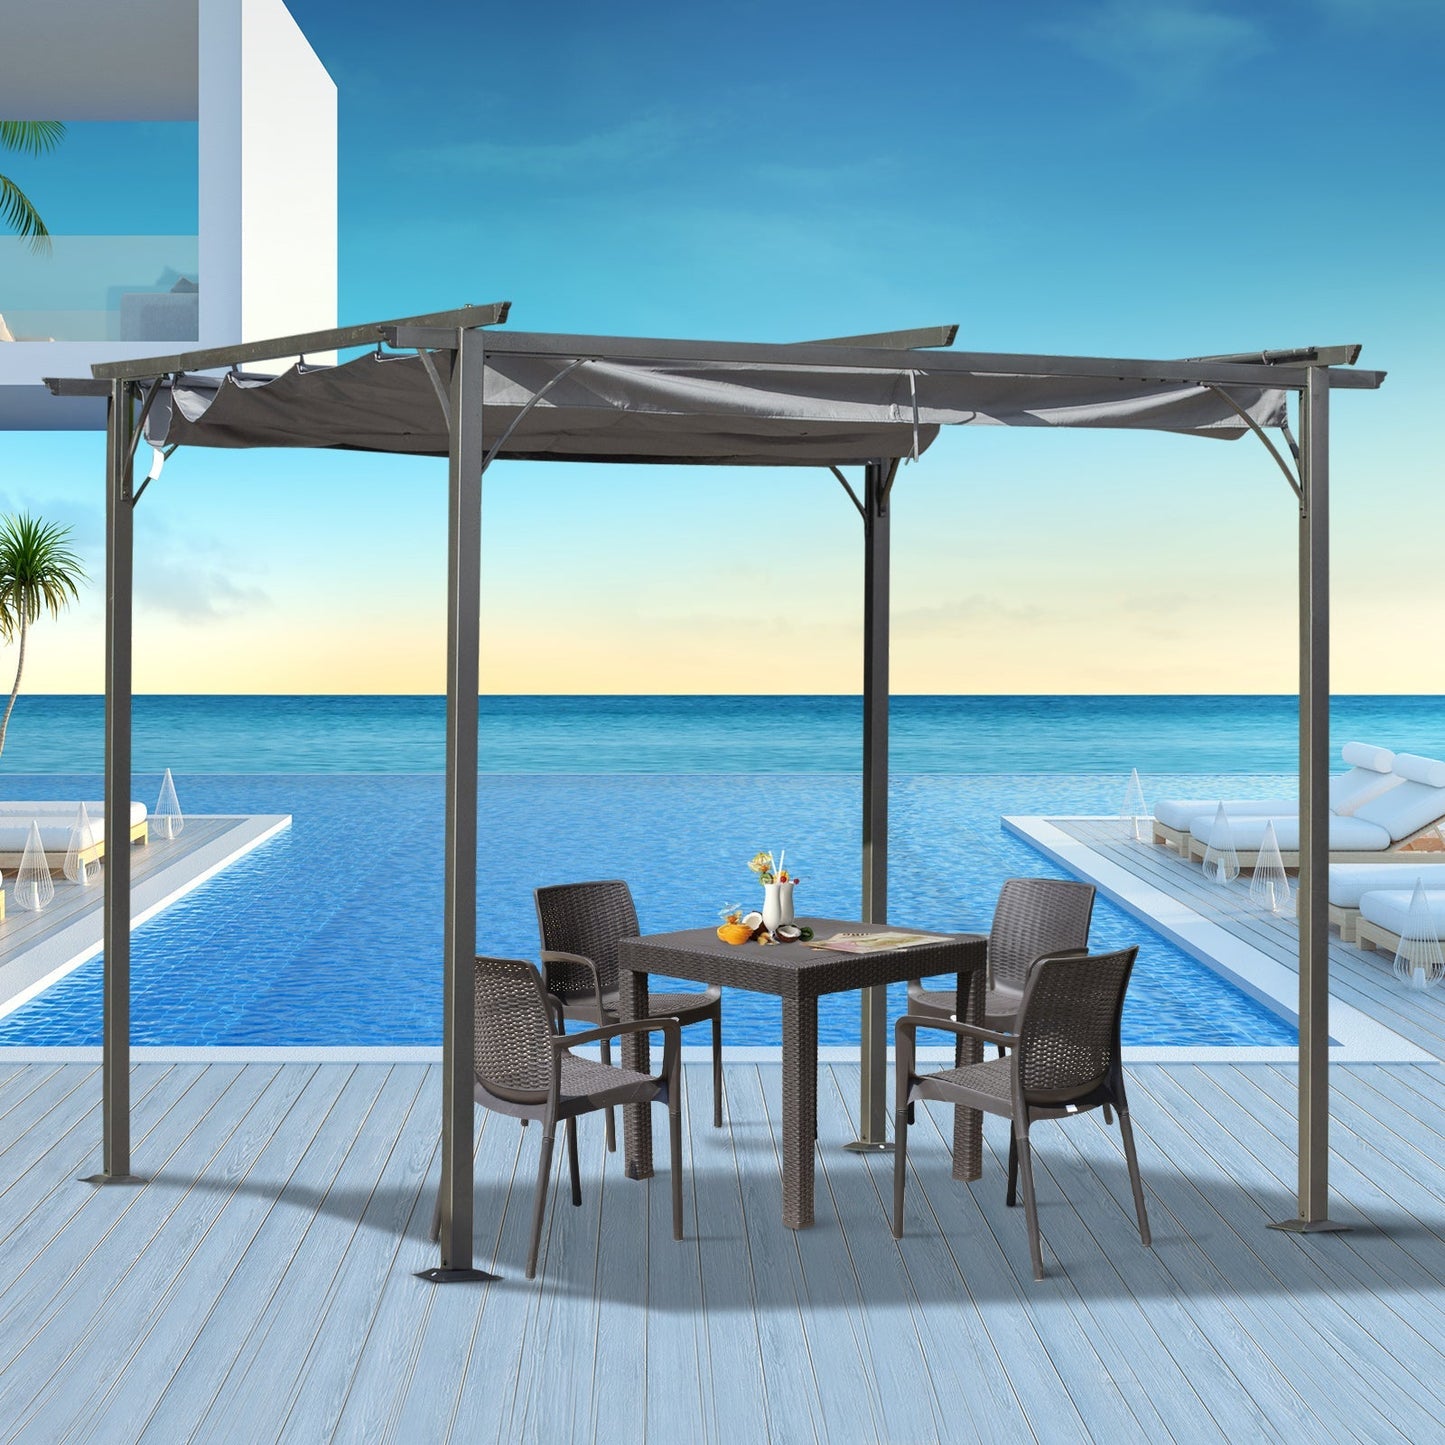 Outdoor and Garden-10' x 10' Retractable Patio Gazebo Pergola with UV Resistant Outdoor Canopy & Strong Steel Frame - Outdoor Style Company